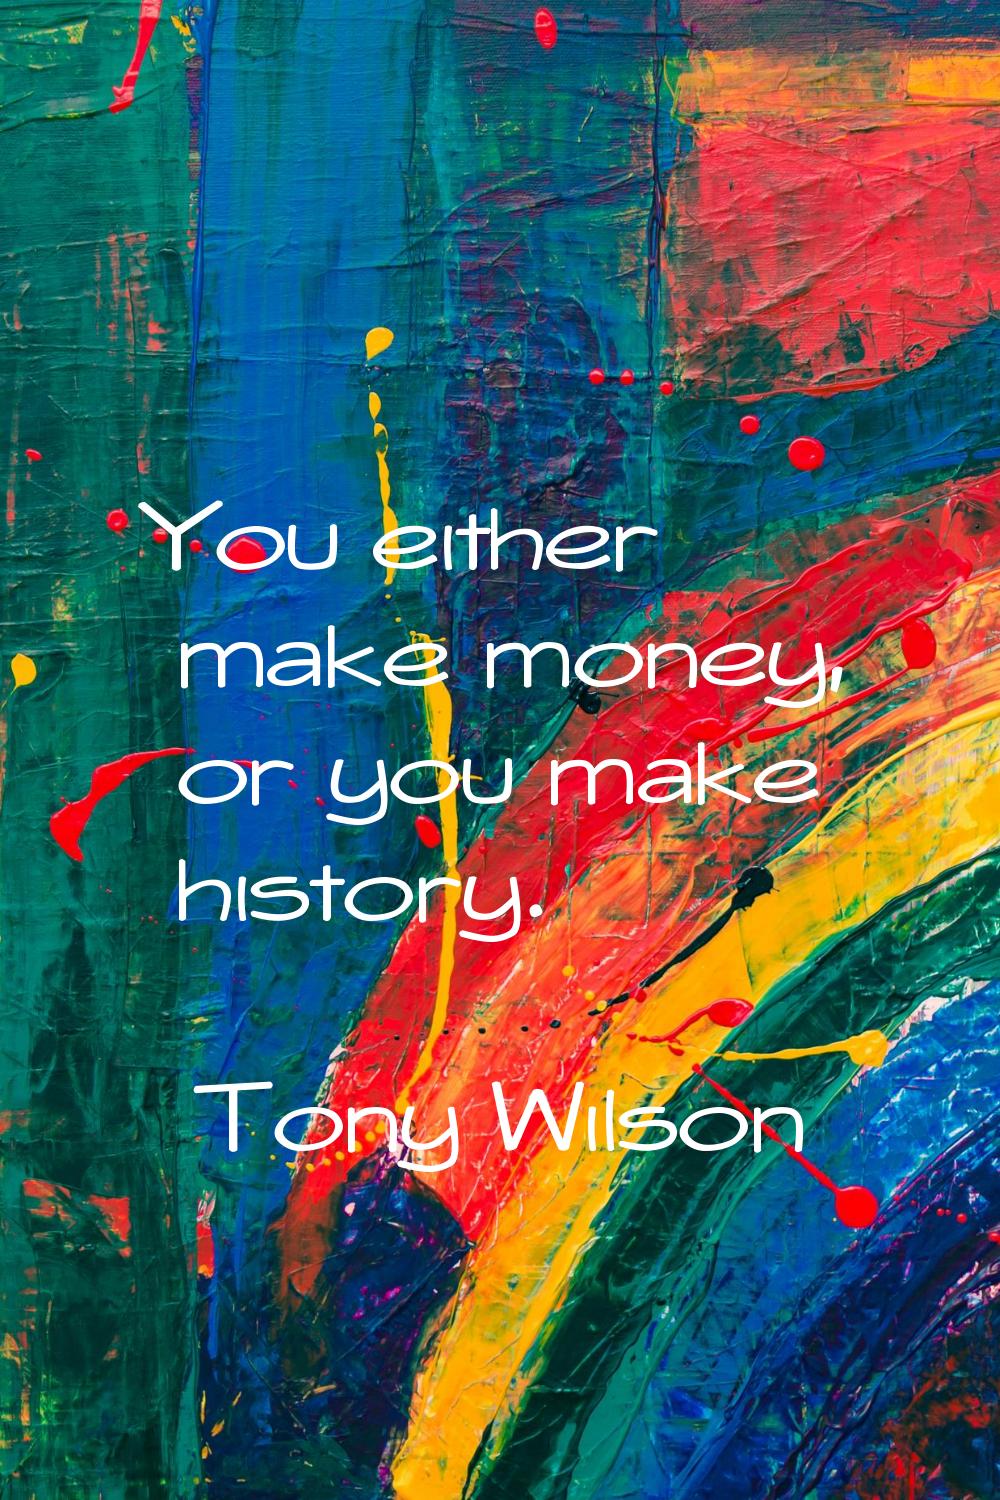 You either make money, or you make history.